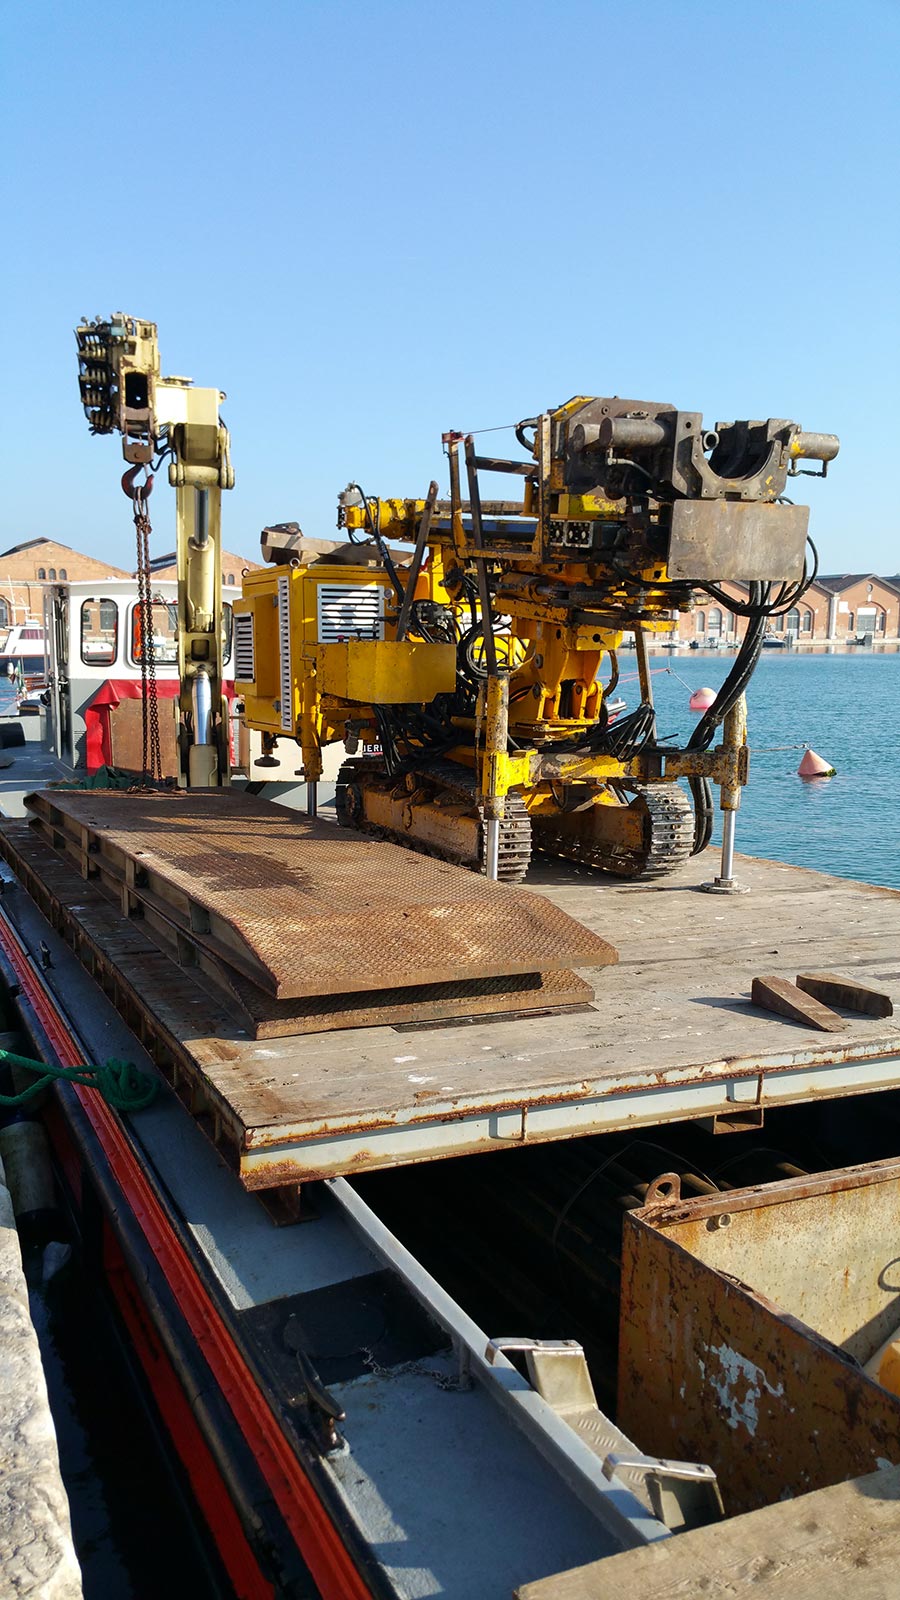 Transporting materials for the building industry around Venice